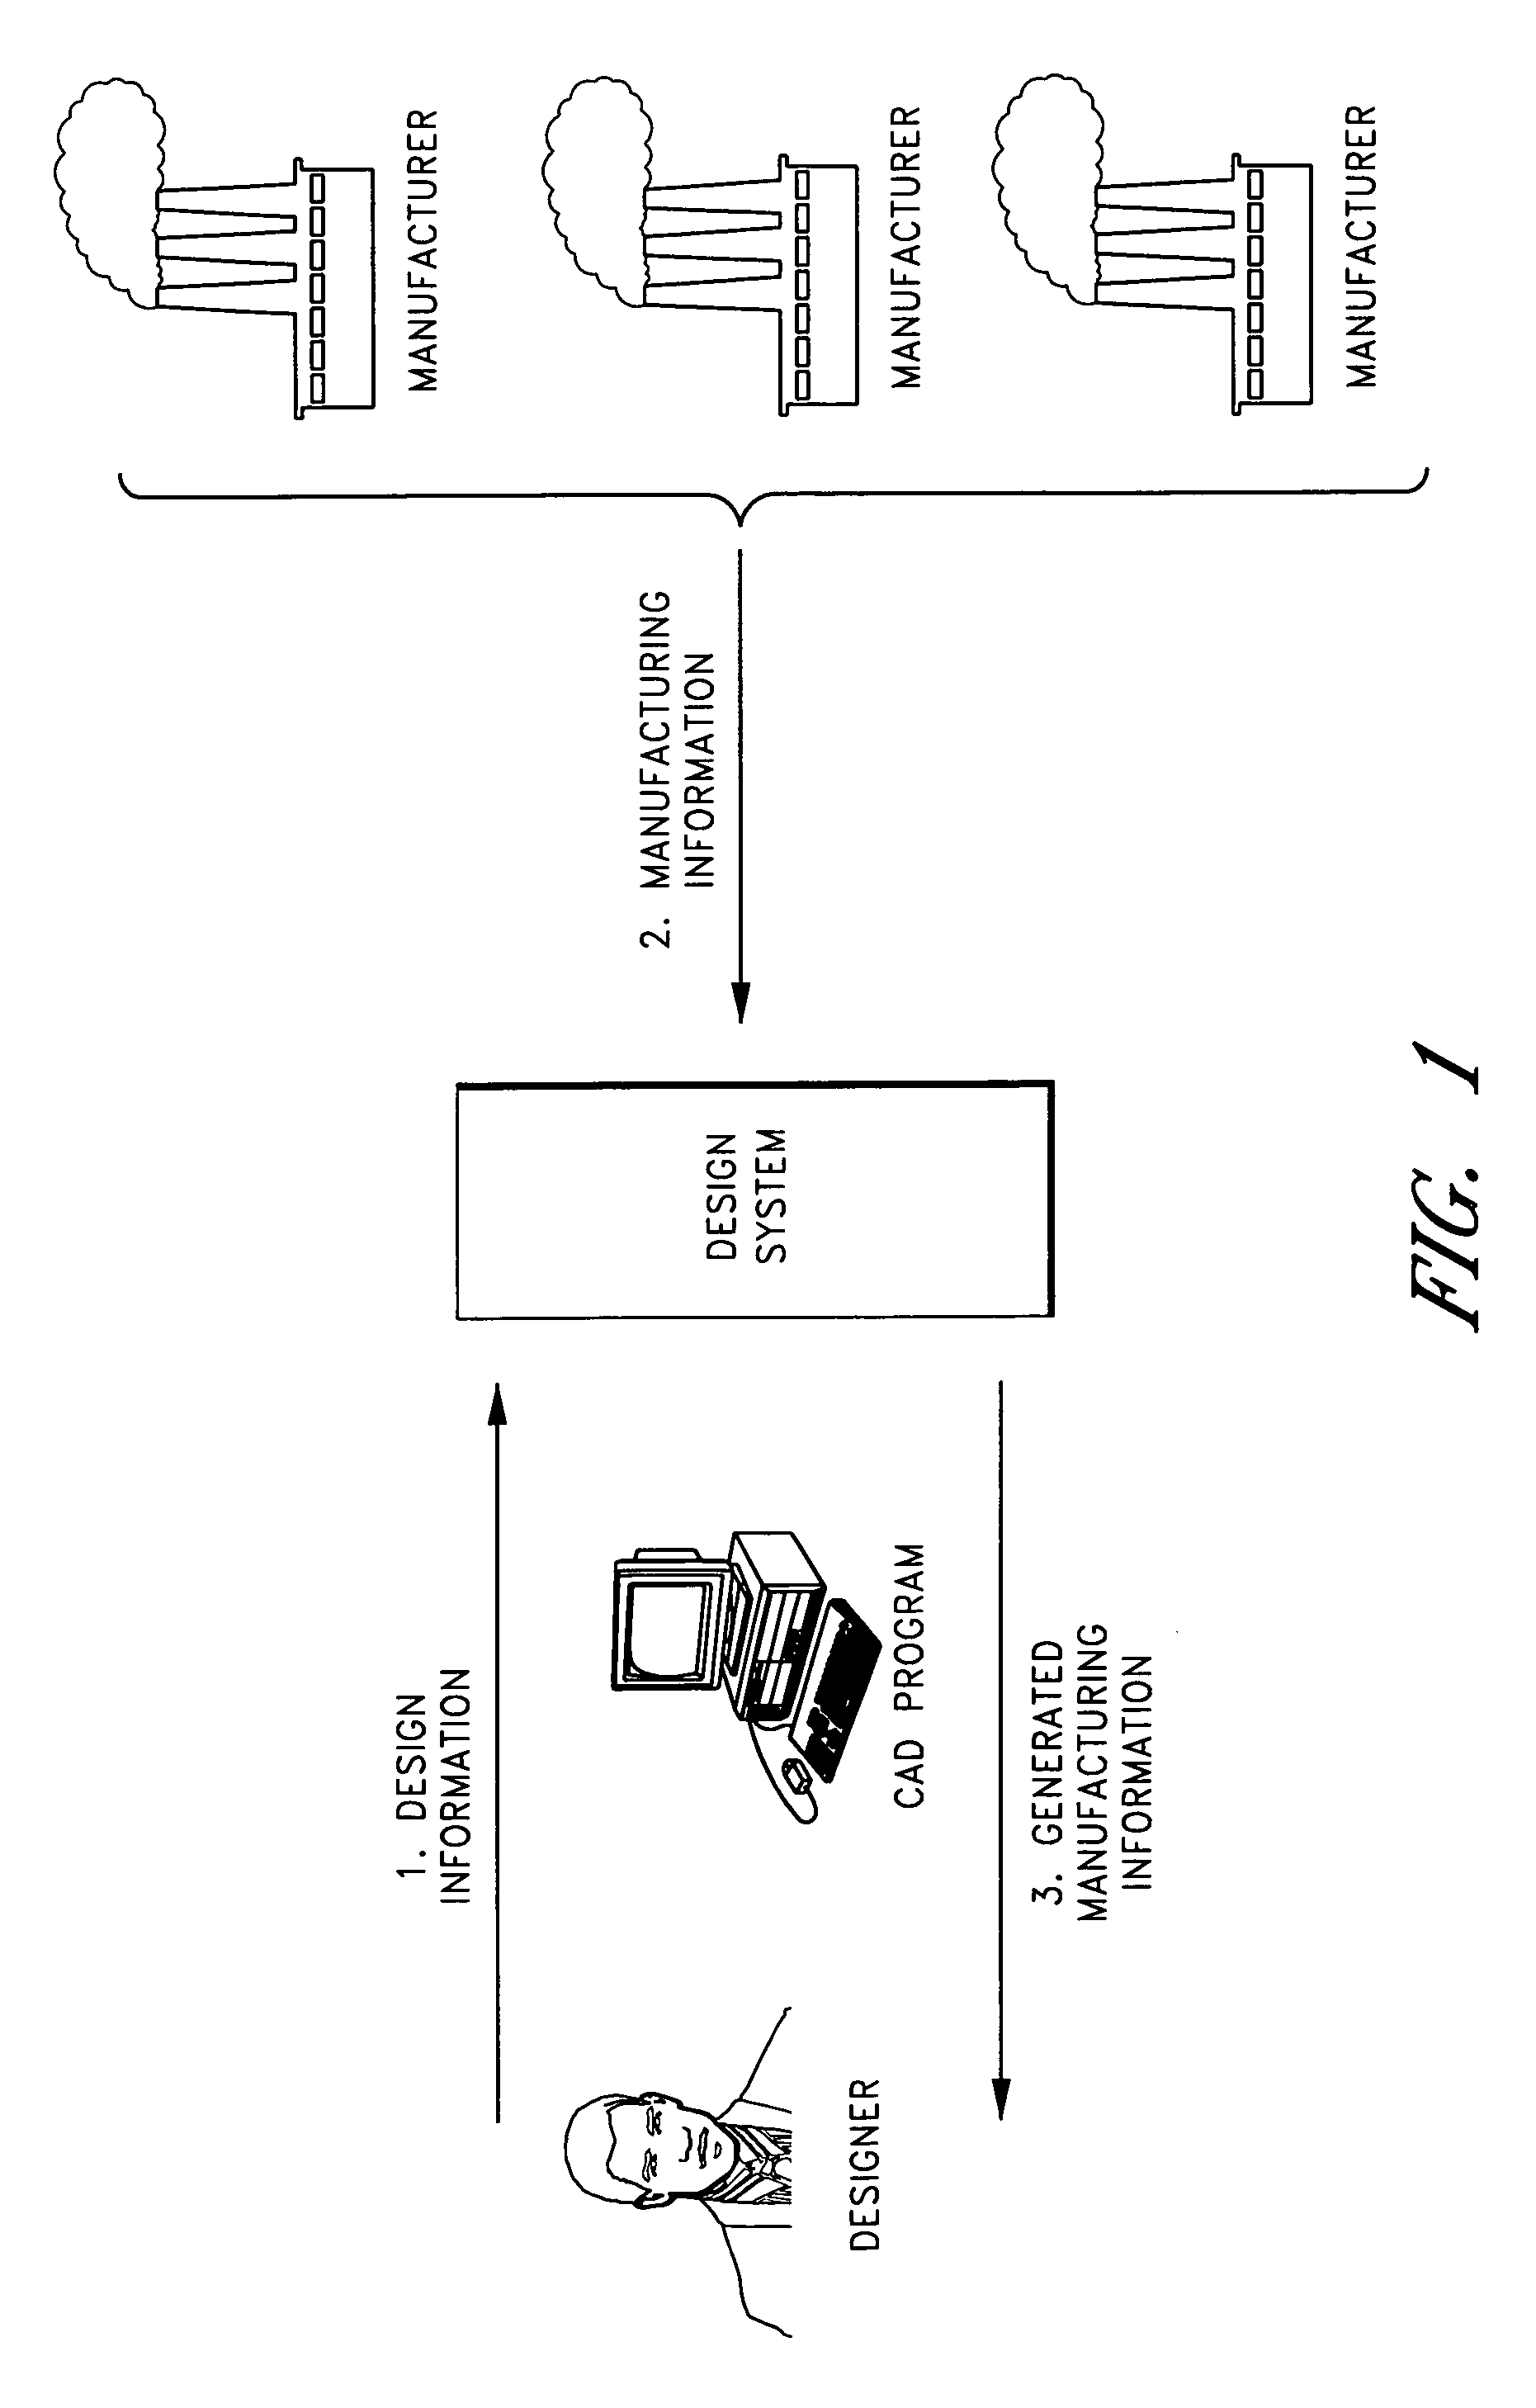 System and method for design of a component